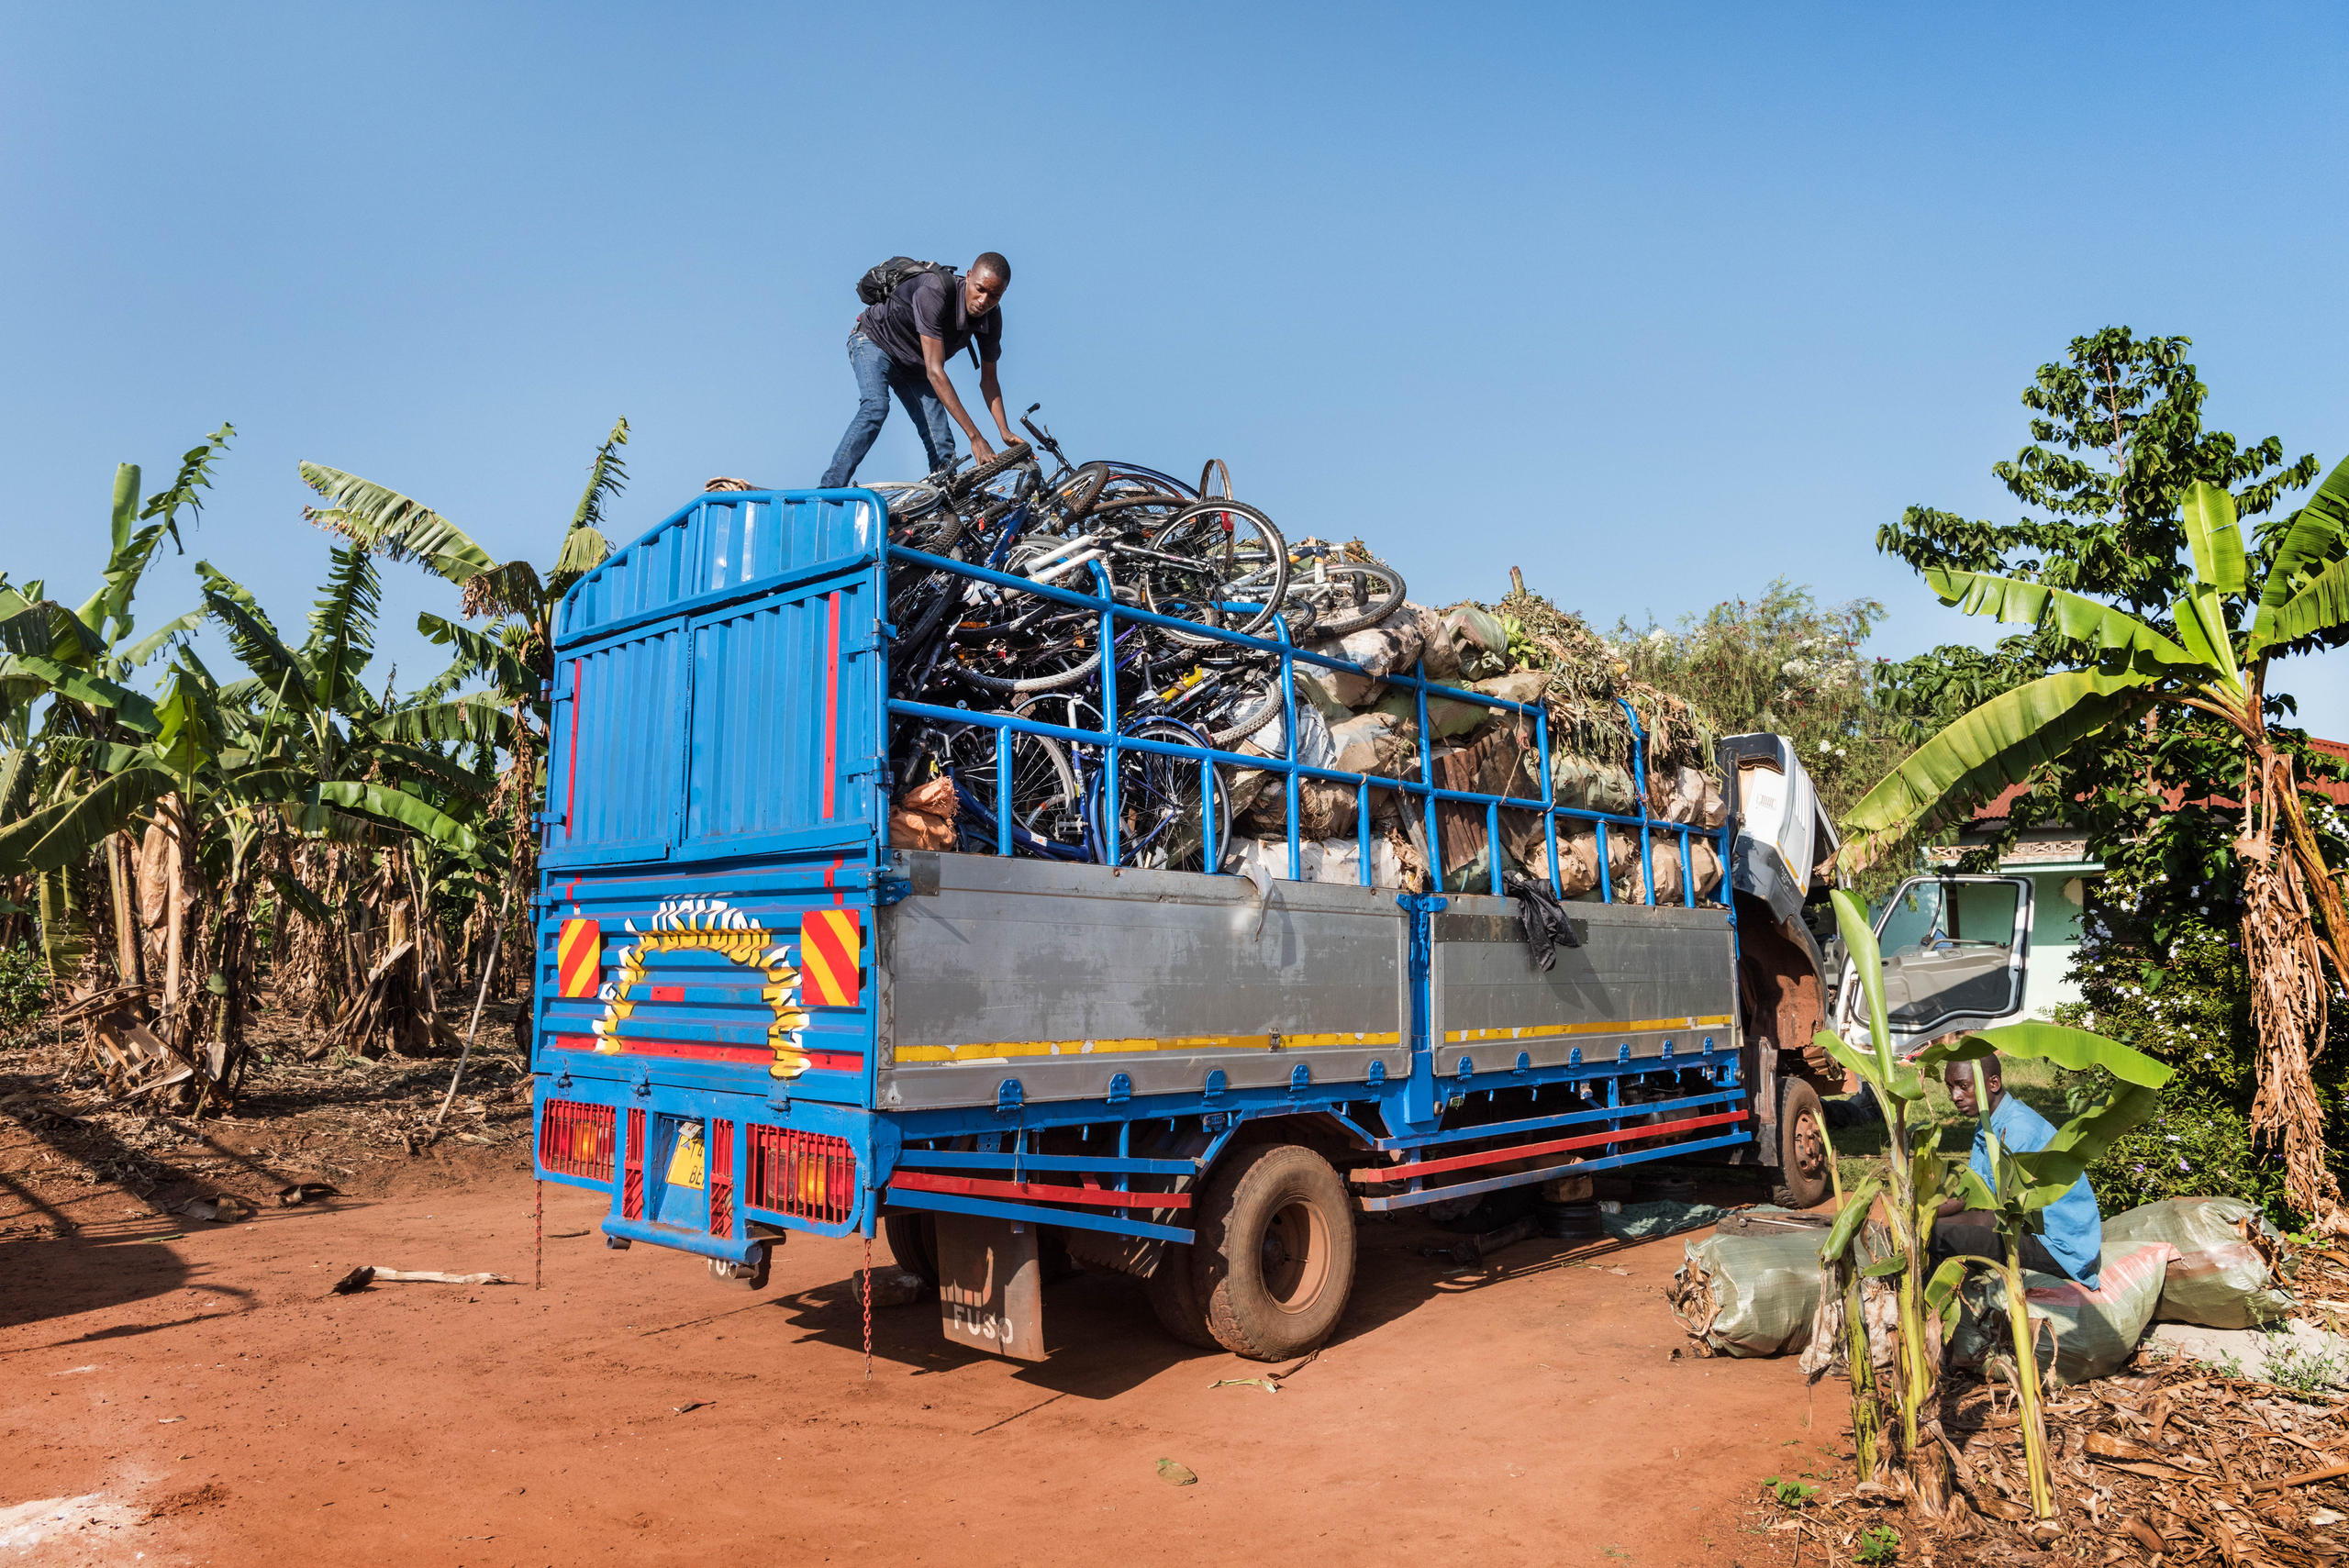 A truck filled with bikes on a dirt road